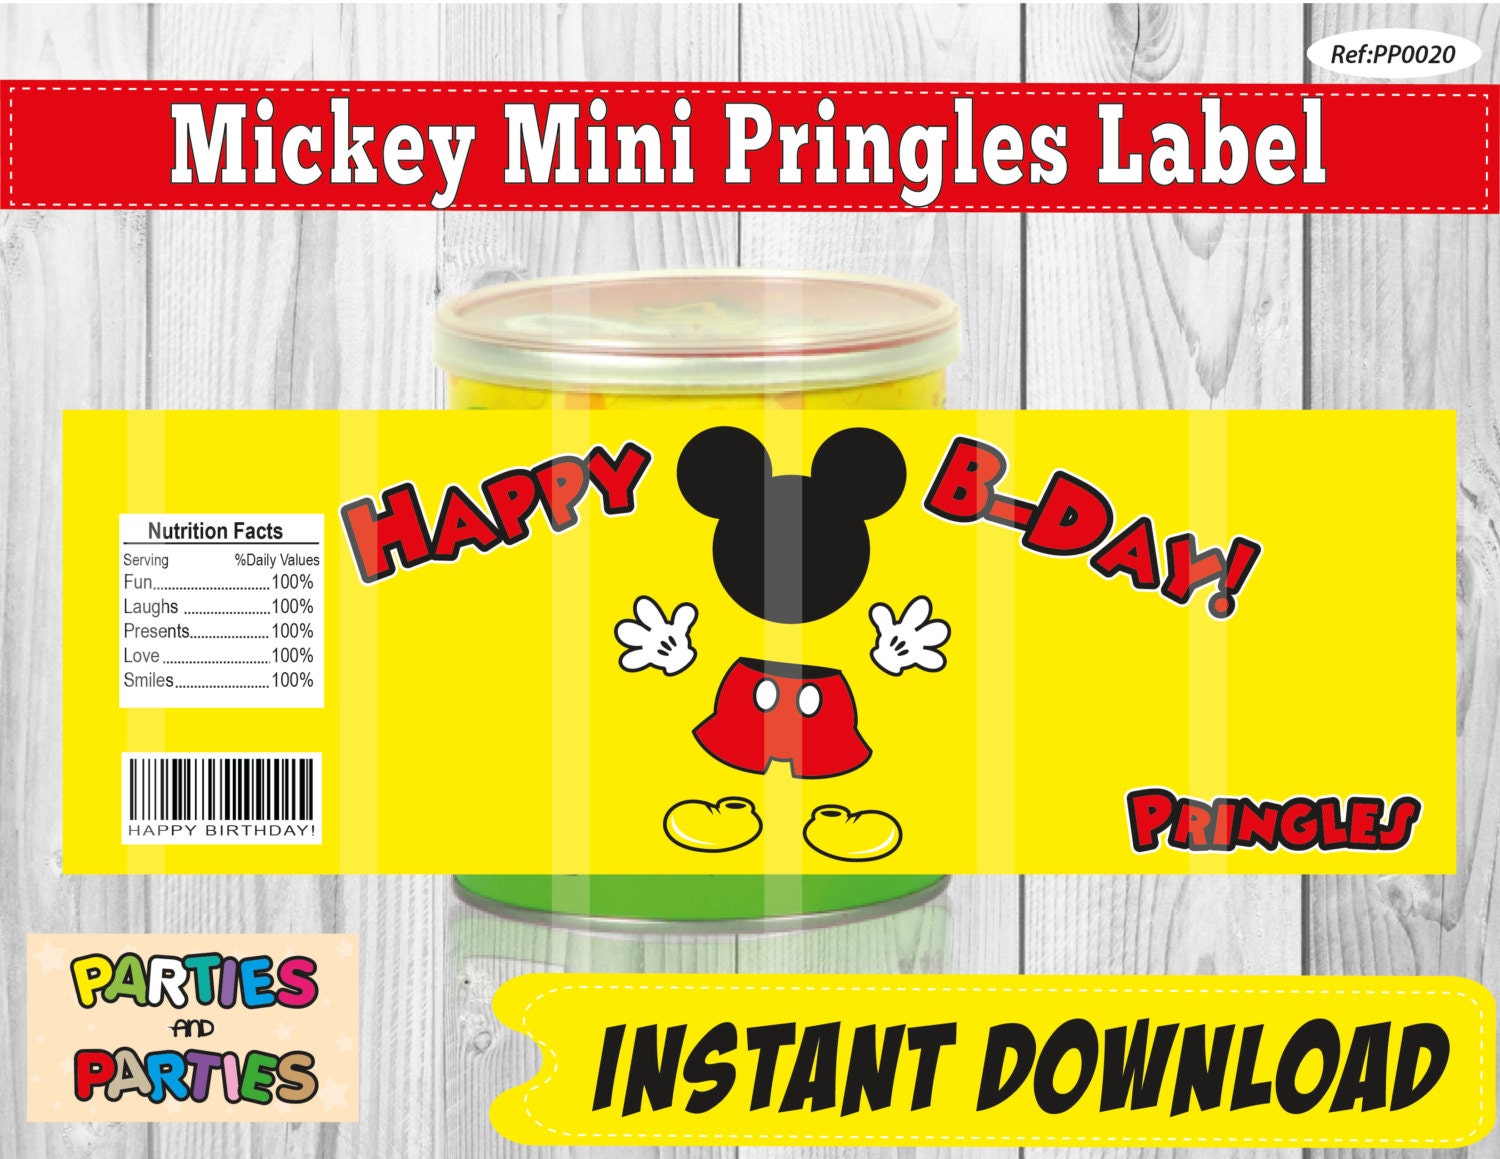 50 OFF Mickey Printable Mini pringles Label by PartiesandParties